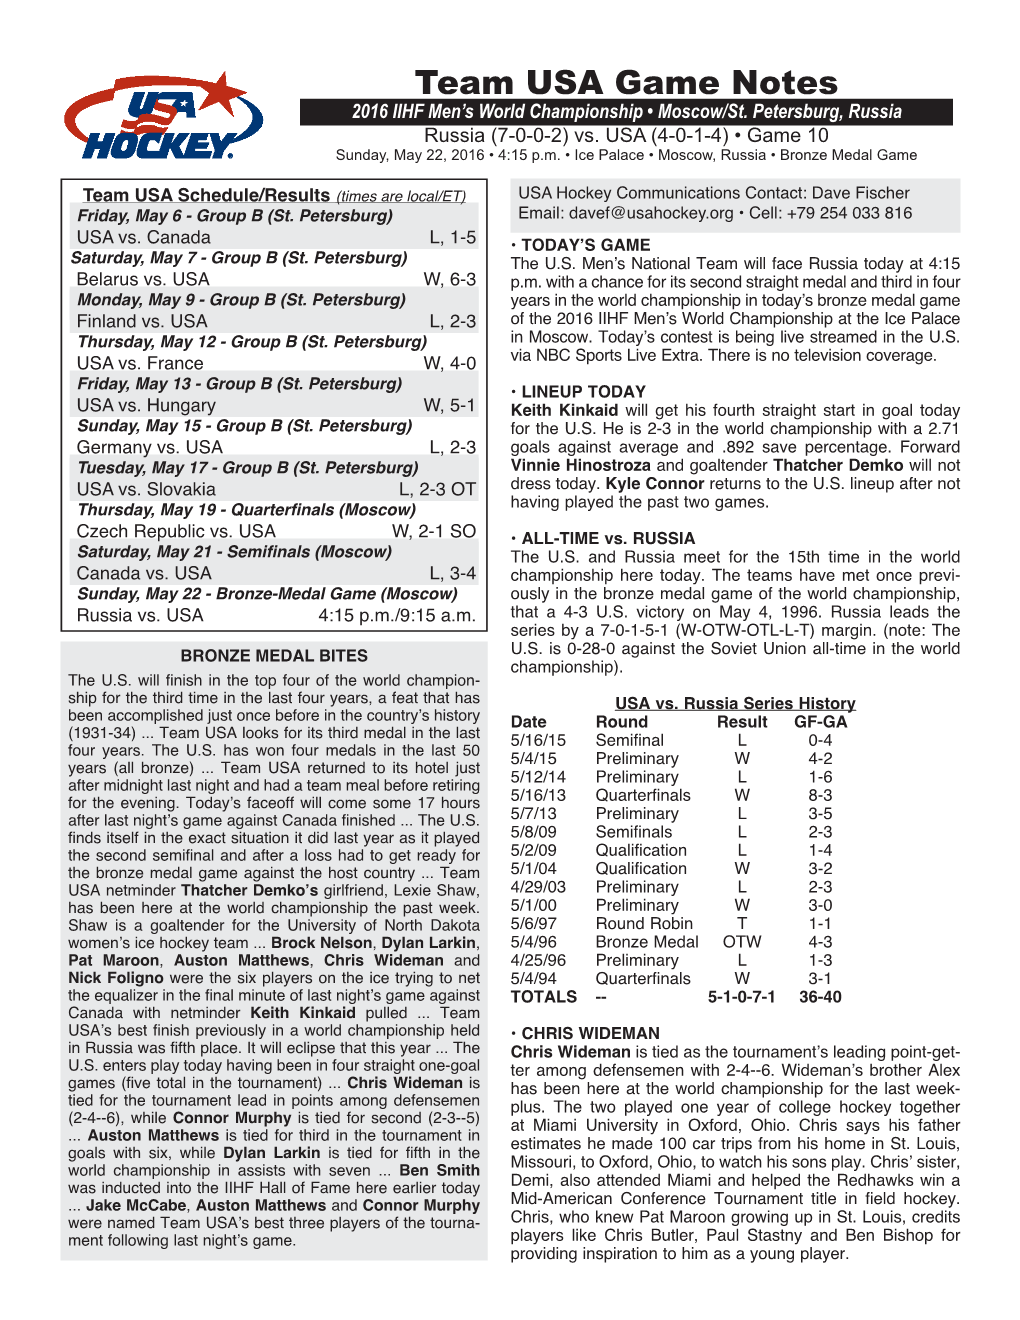 Game Notes Vs. Russia • Sunday, May 22, 2016 • 2016 IIHF Men’S World Championship • Page Two • the U.S